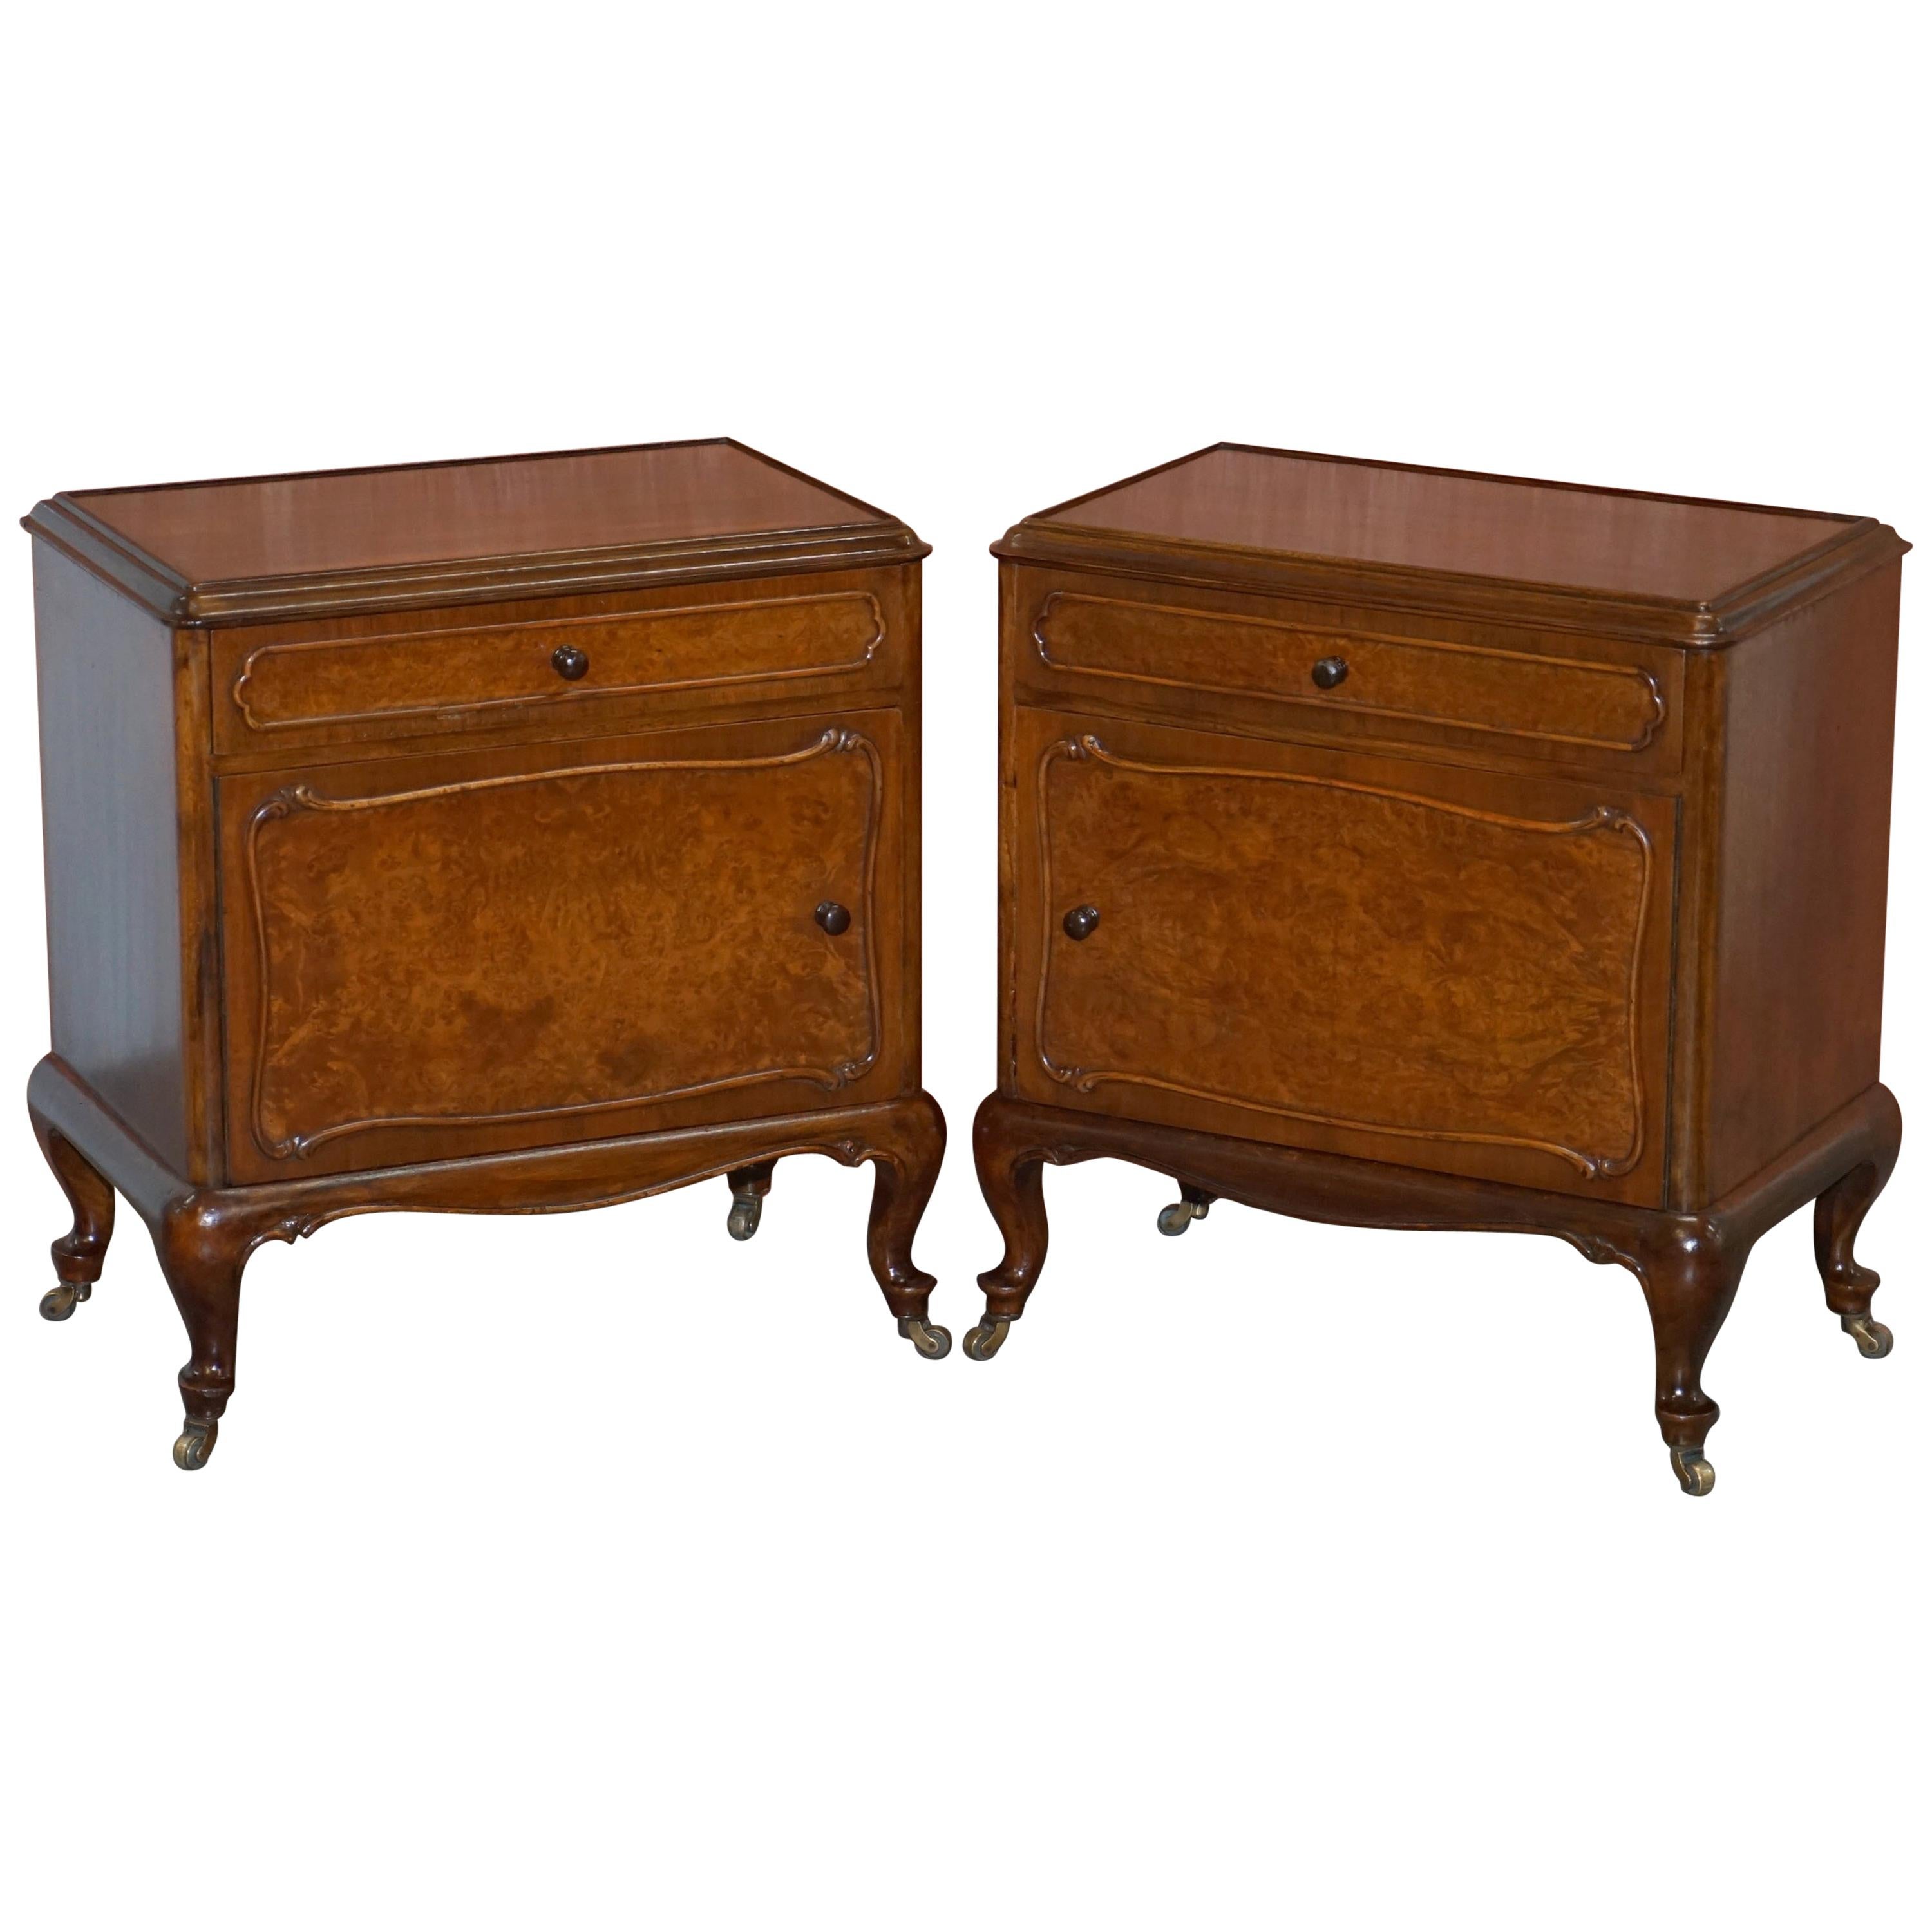 Pair of circa 1920 Burr Walnut Side Lamp or Bedside Table Nightstands Cupboards